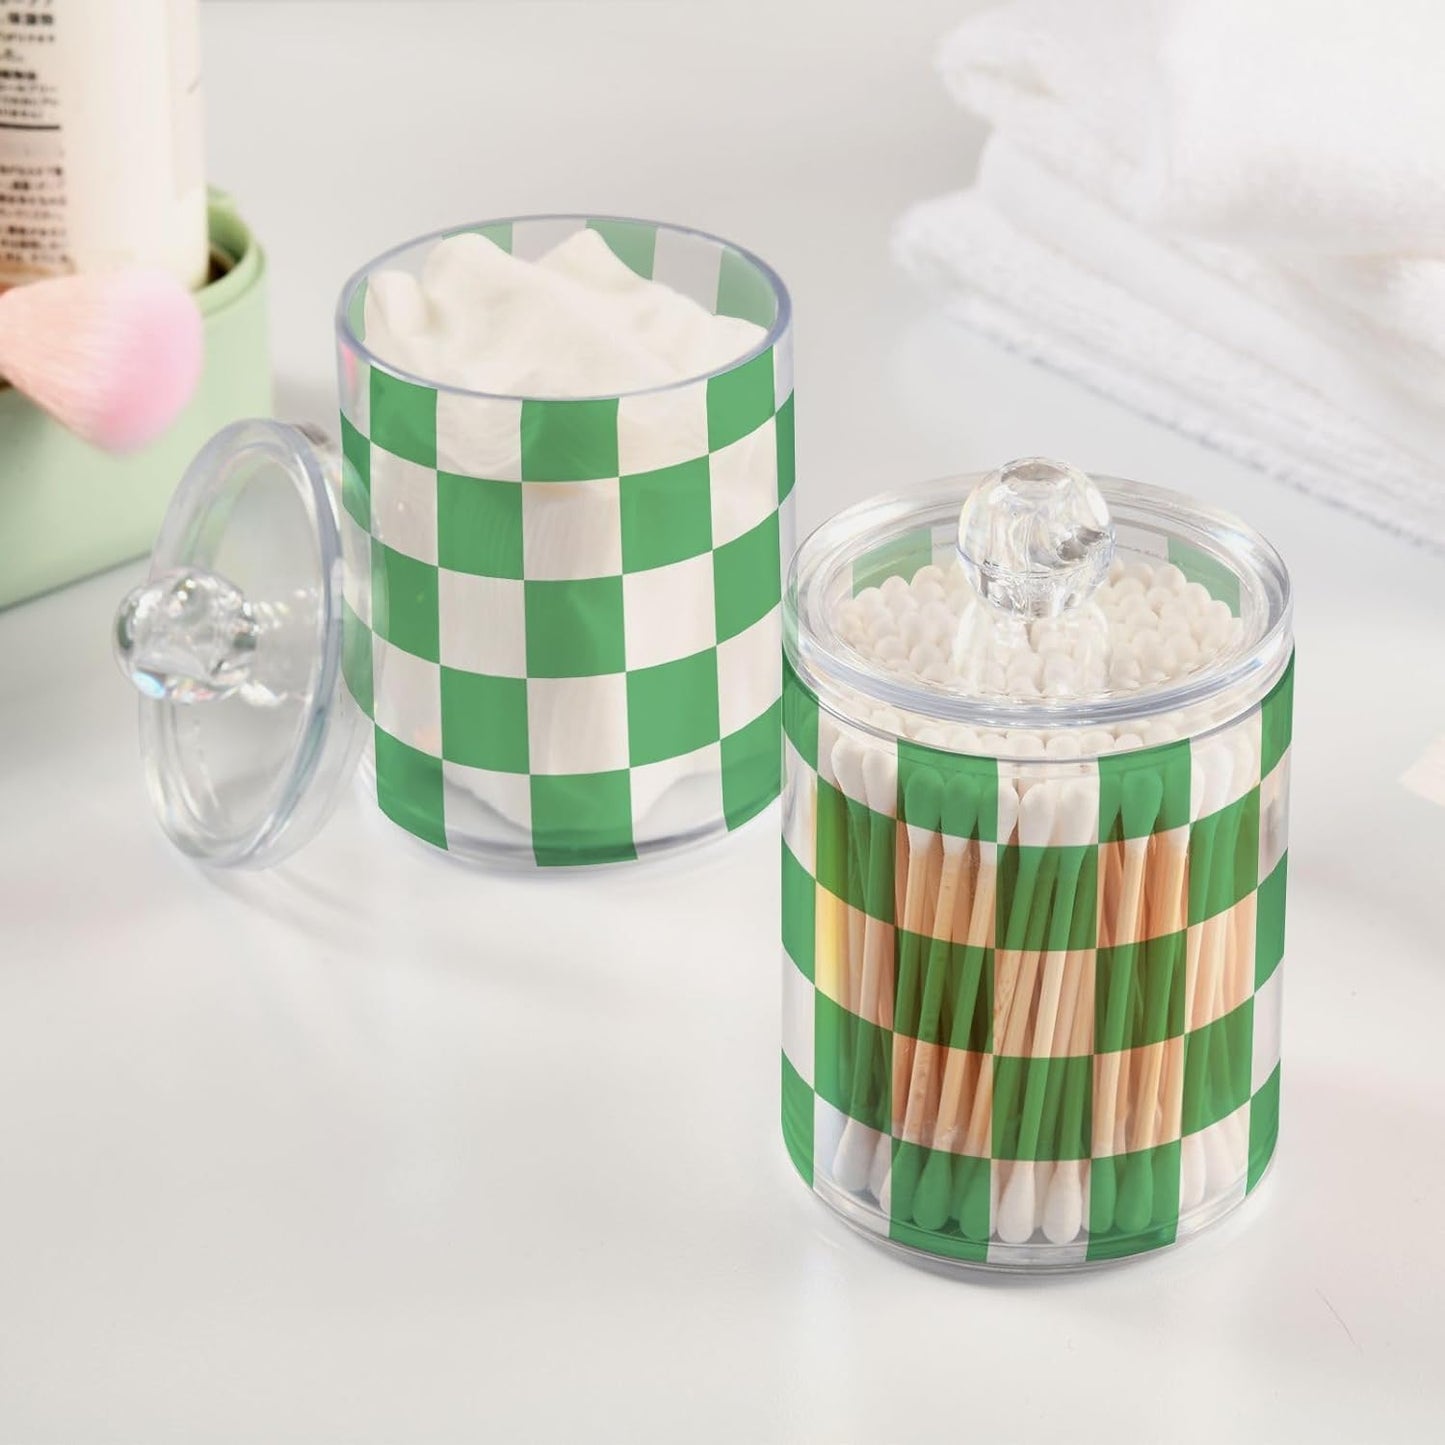 Lattice Green White Square Qtip Holder Dispenser Buffalo Checkered Plaid Bathroom Canister Storage Organization 4 Pack Clear Plastic Apothecary Jars with Lids Vanity Makeup Organizer For Cotton Swab